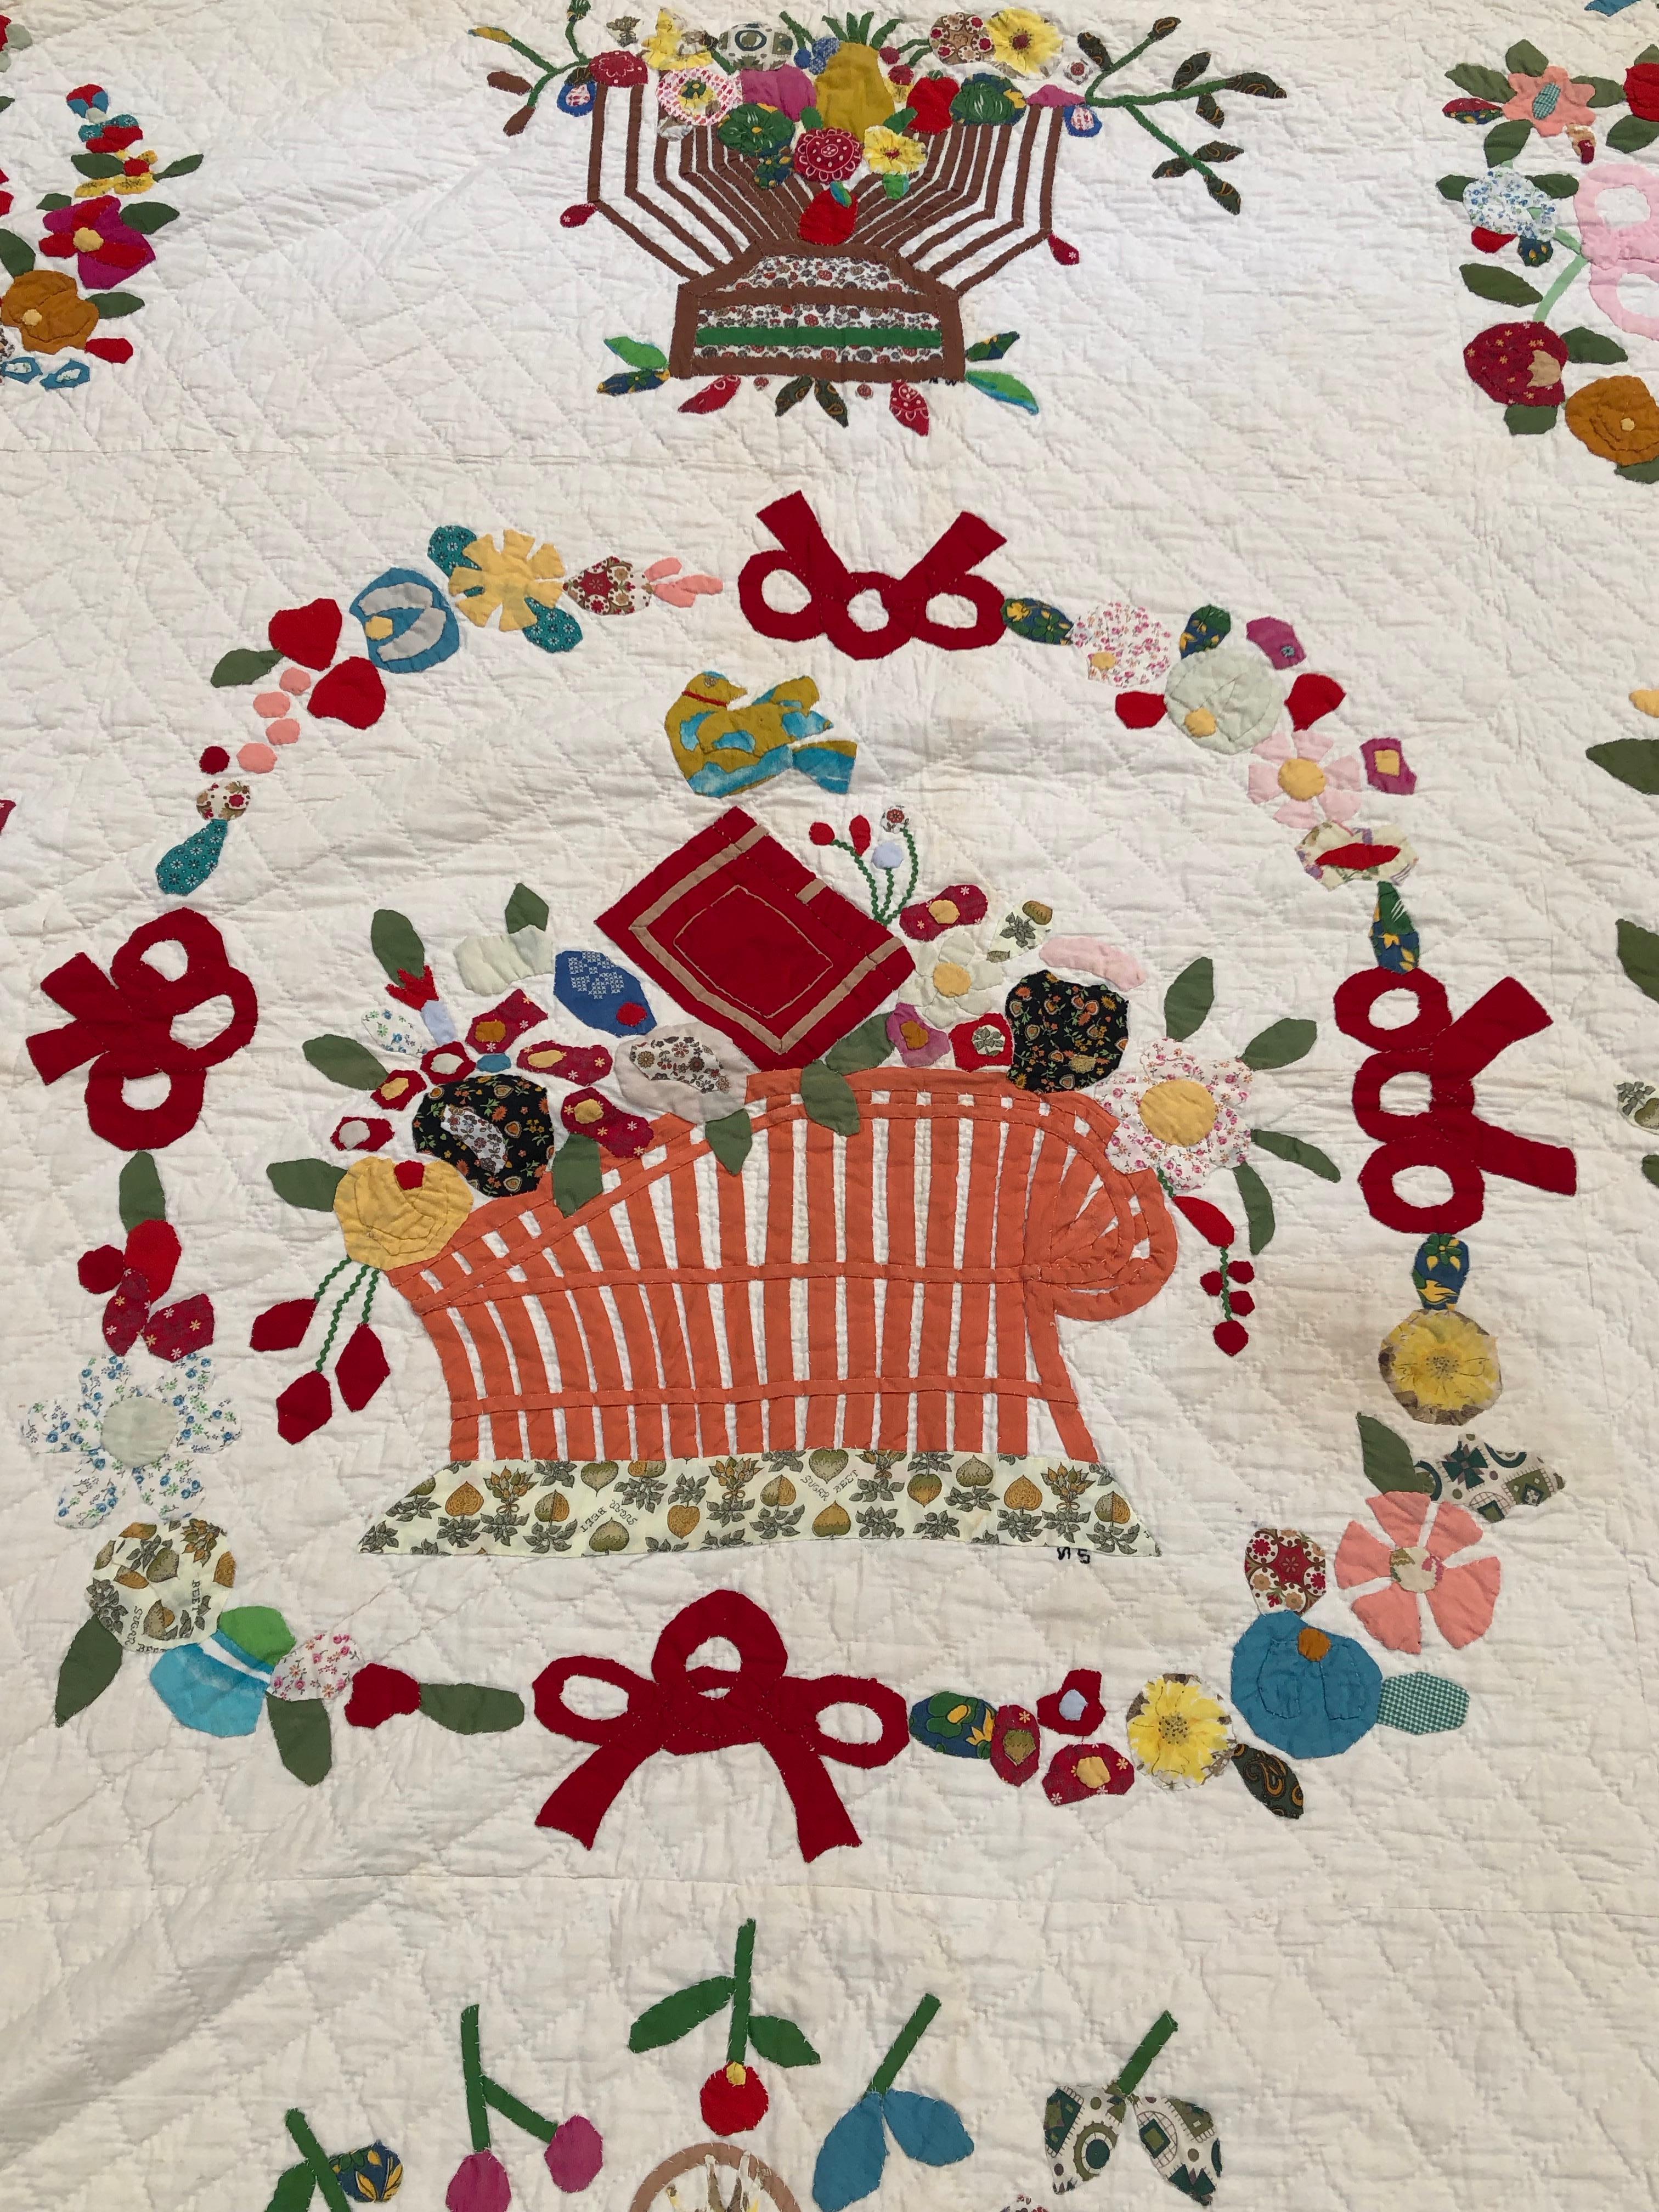 Baltimore Album Quilt 29 Blocks Nine Birds and Open Baskets Signed Armstrong In Good Condition For Sale In Allentown, PA